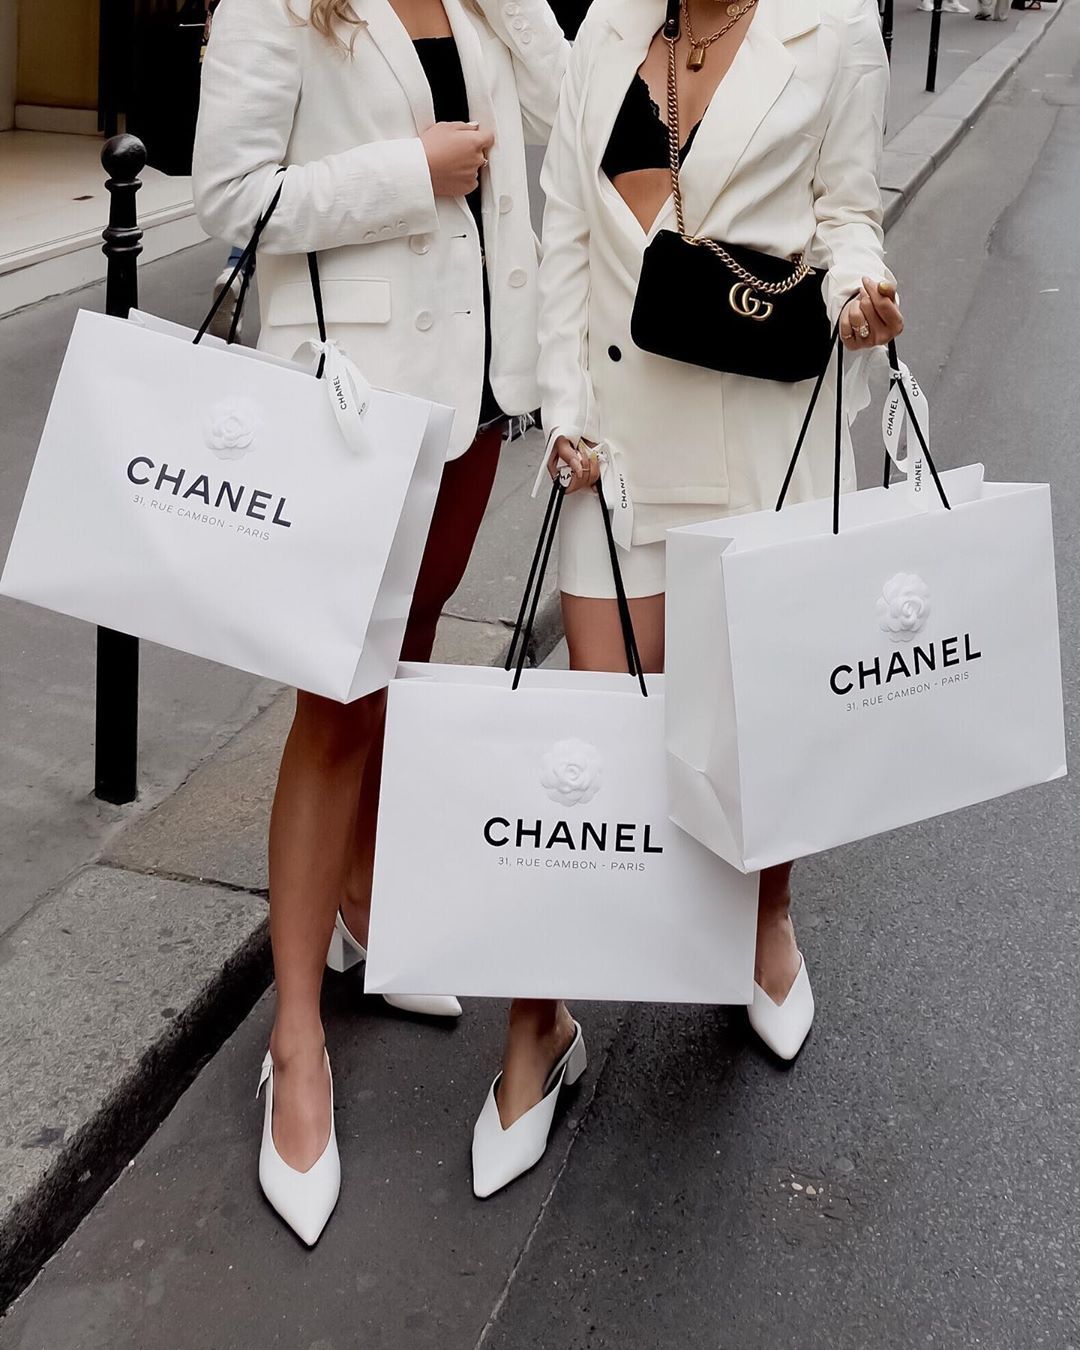 Spend More, Get More: Chanel, Celine, Rolex Accused of Hermès-style Peihuo  Sales Tactic